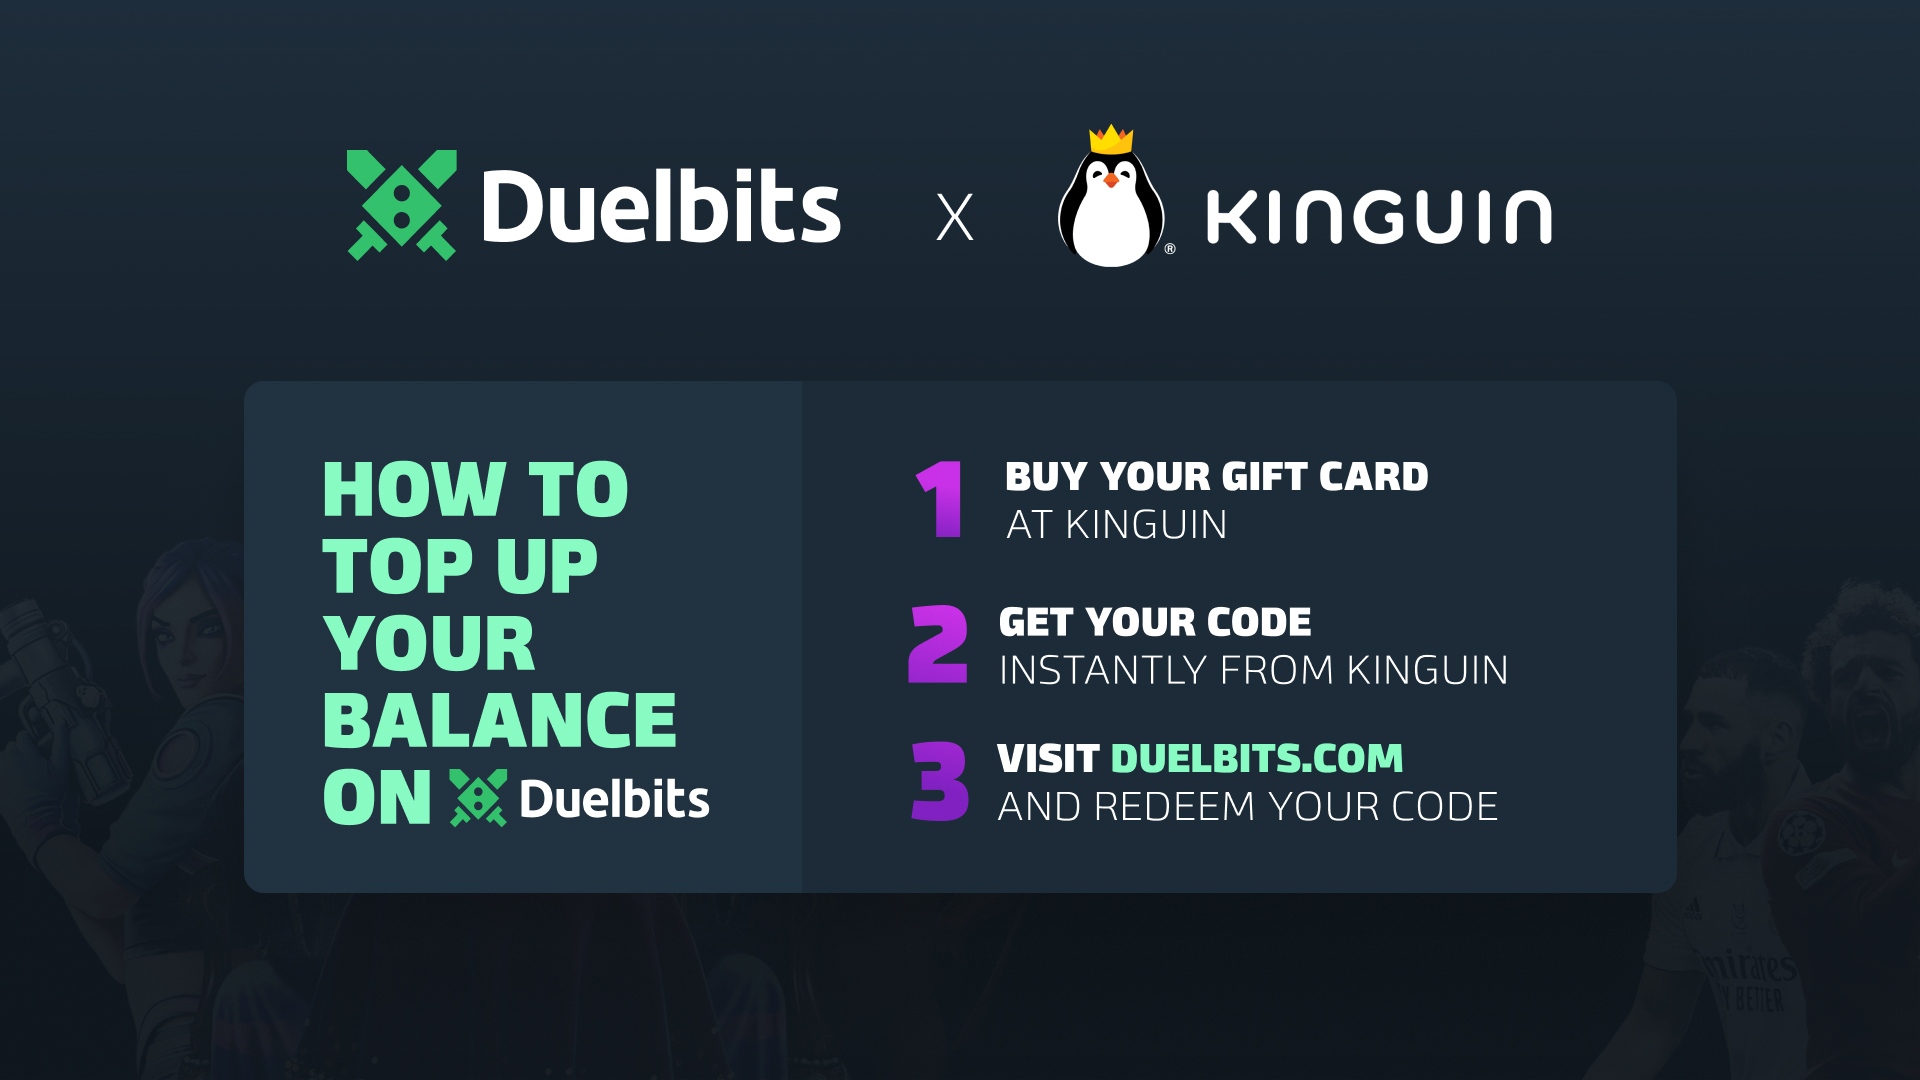 DuelBits $5 Gift Card 6.27 $